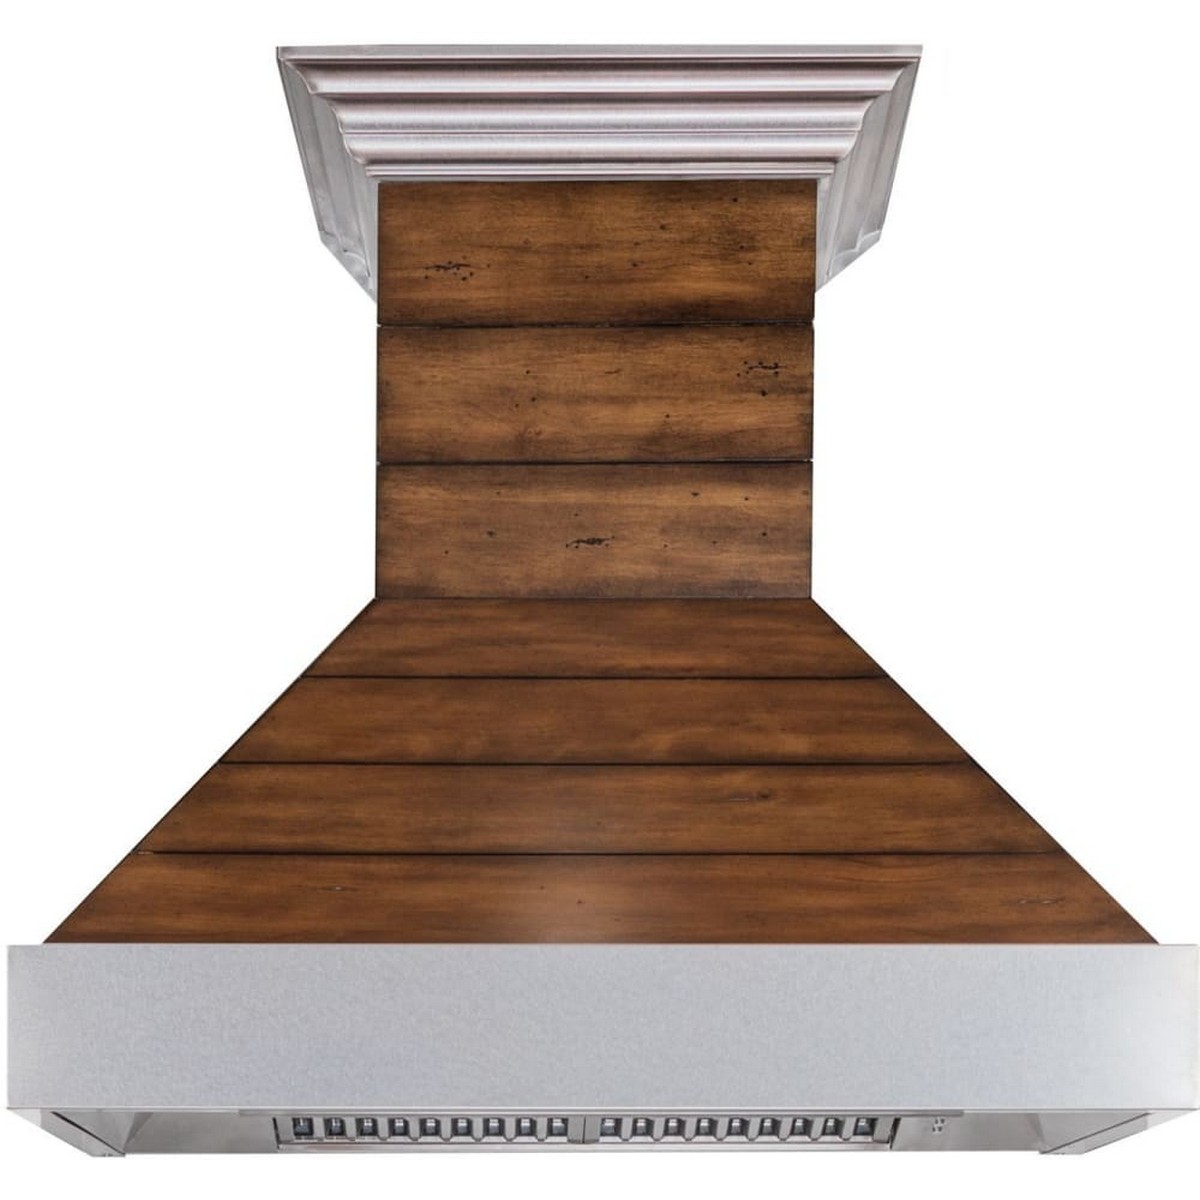 ZLINE 365BB-36 36 X 17 1/2 INCH DUCTED WOODEN WALL RANGE HOOD IN WOOD AND SHIP LAP BROWN